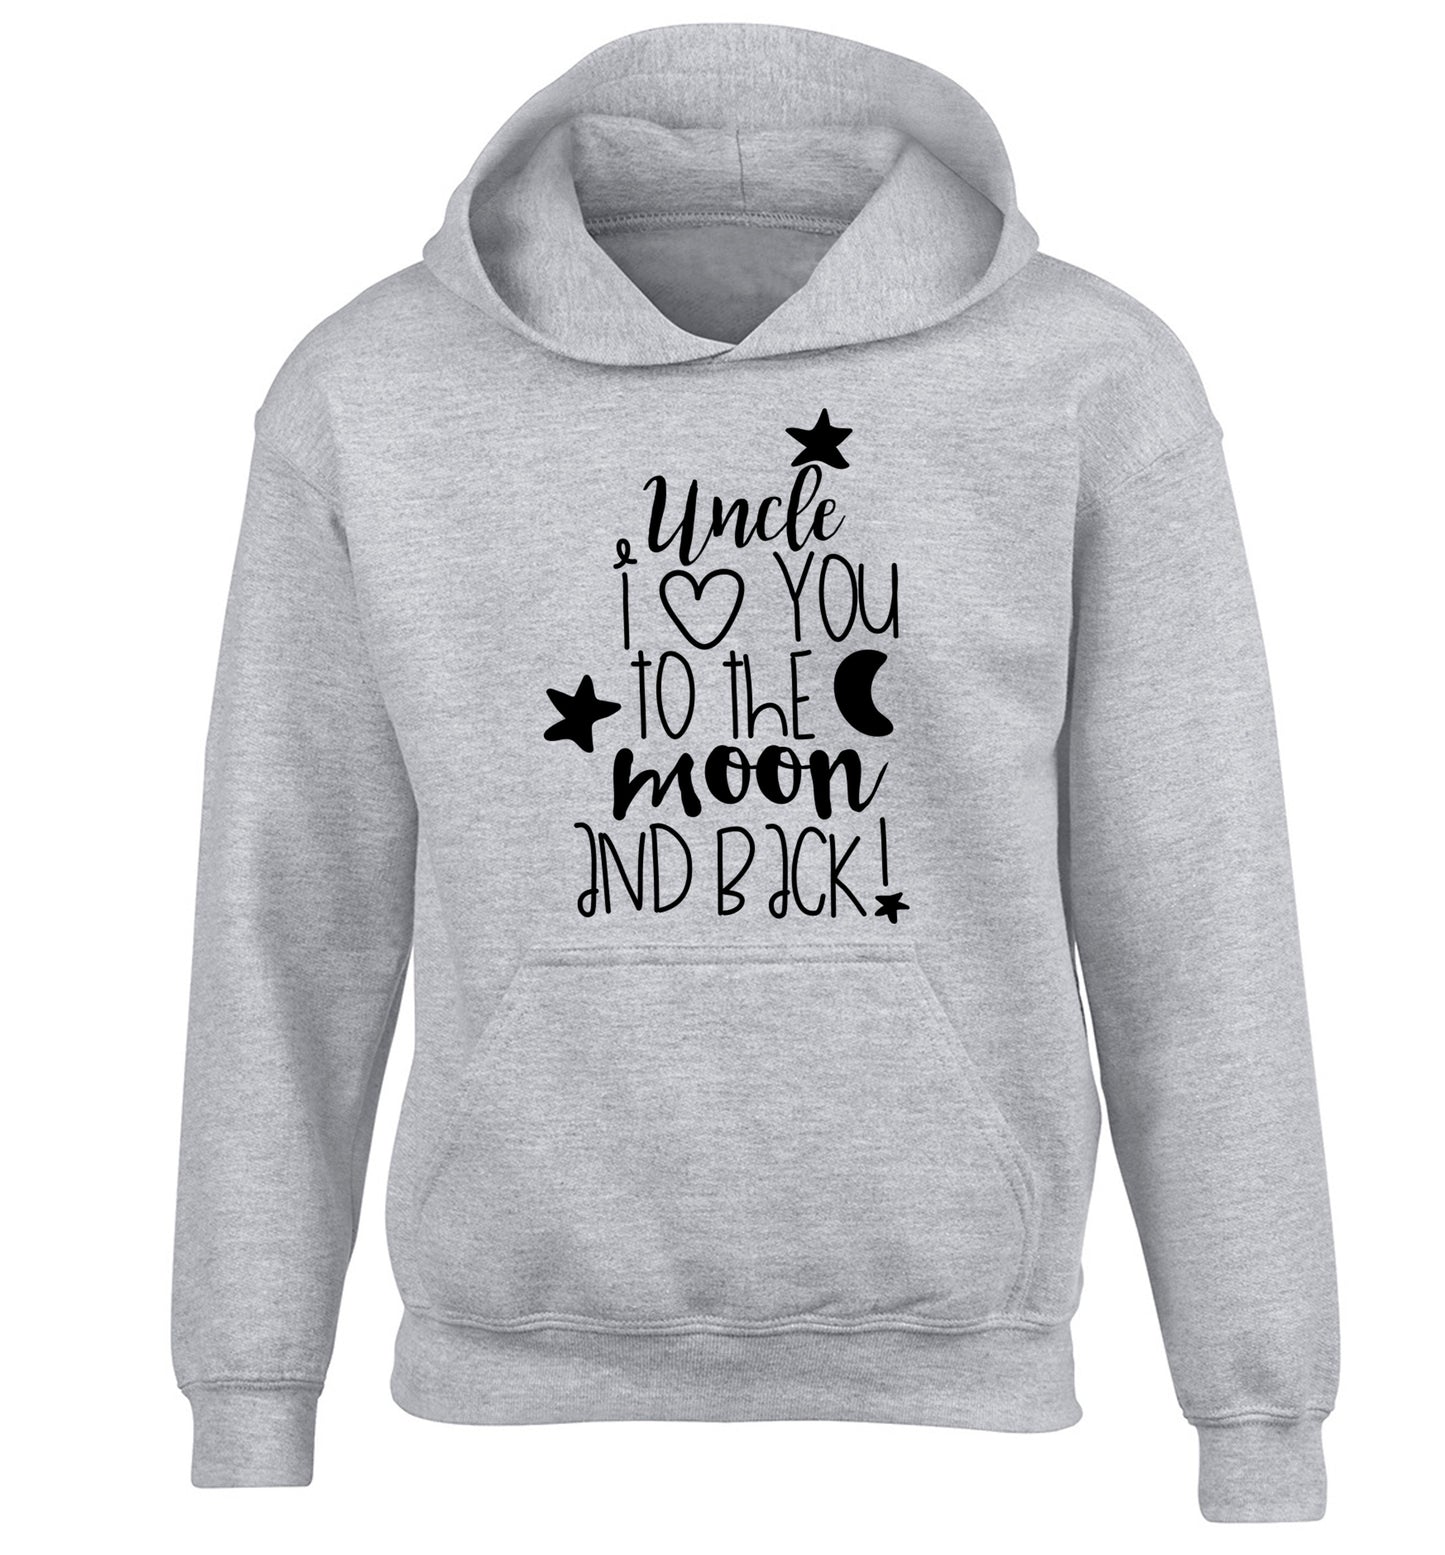 Uncle I love you to the moon and back children's grey hoodie 12-14 Years